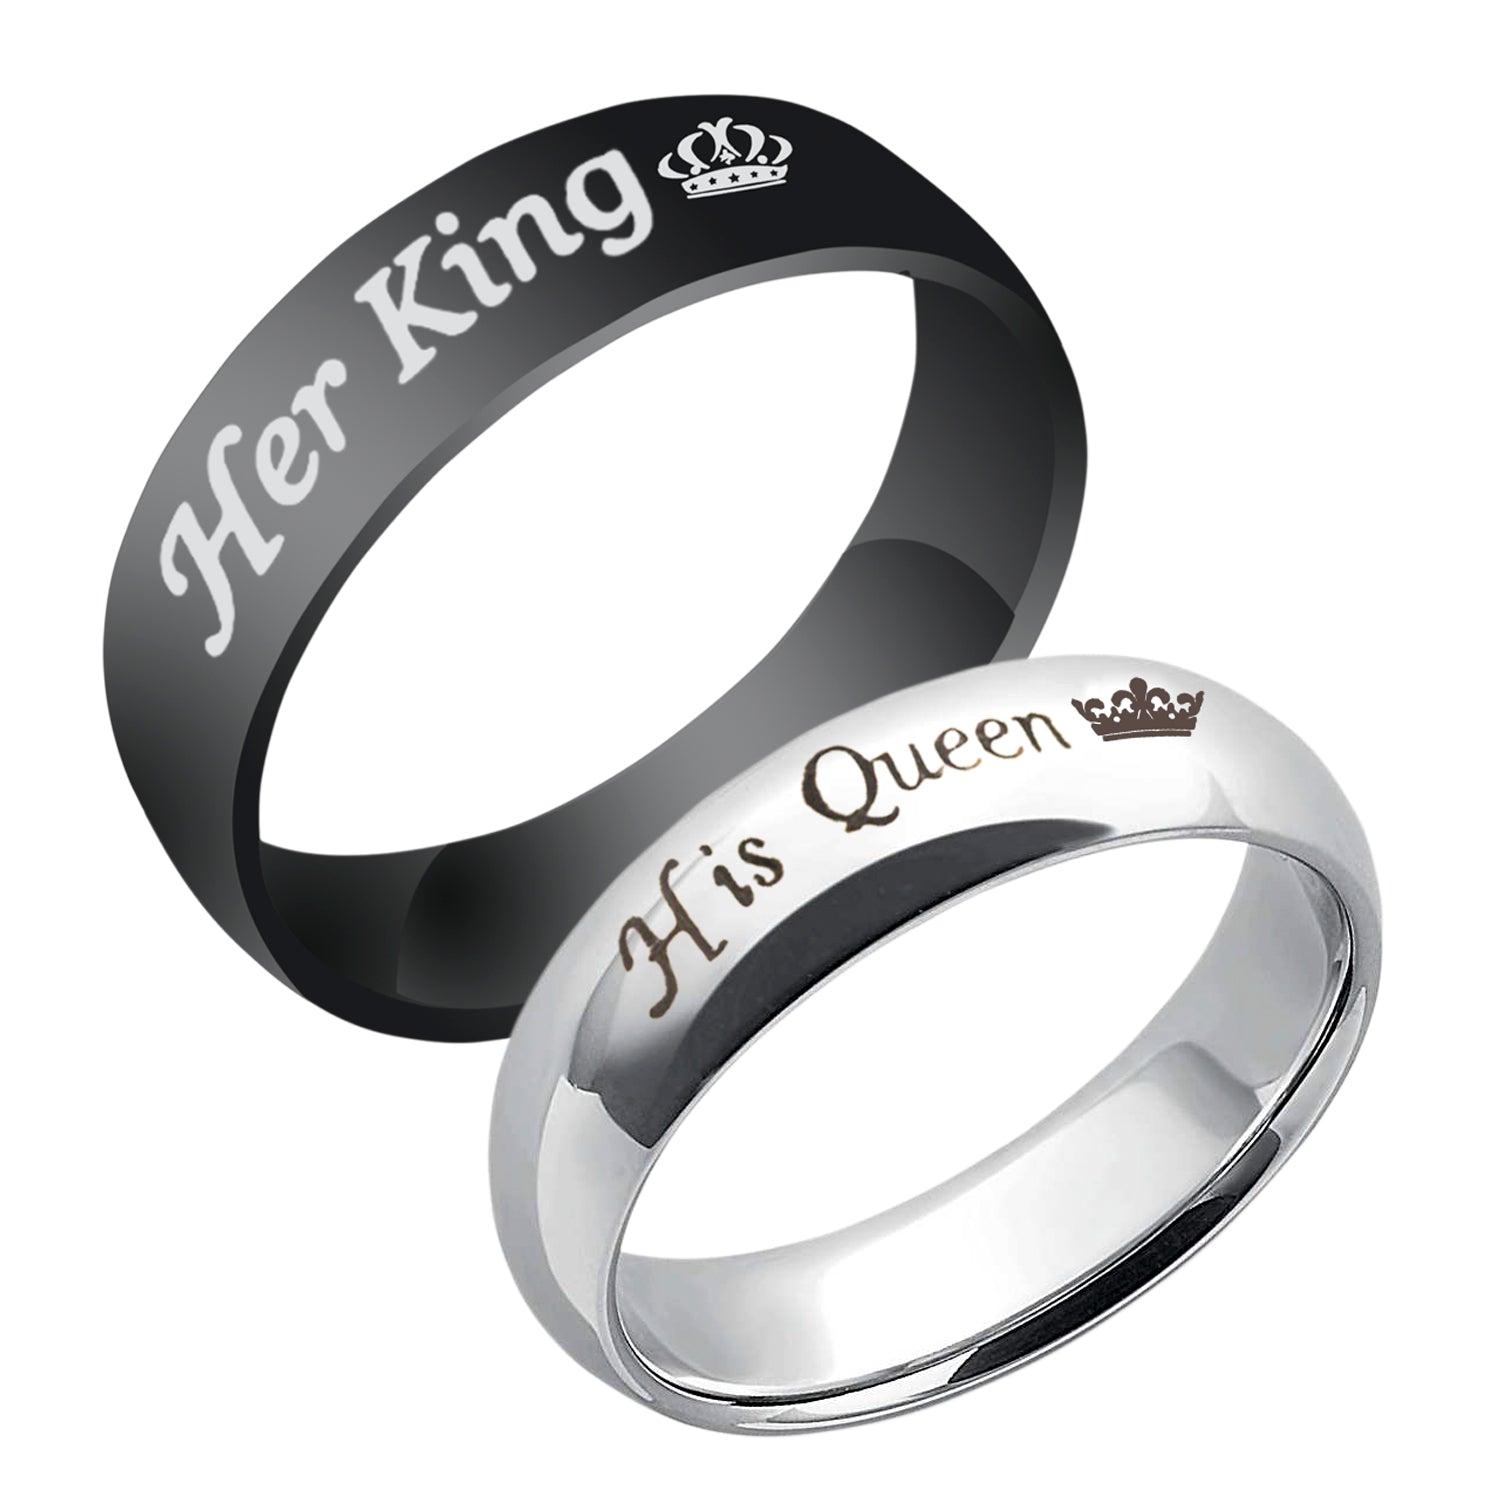 Urbana  His Queen Her King Couple Rings Set -1004601